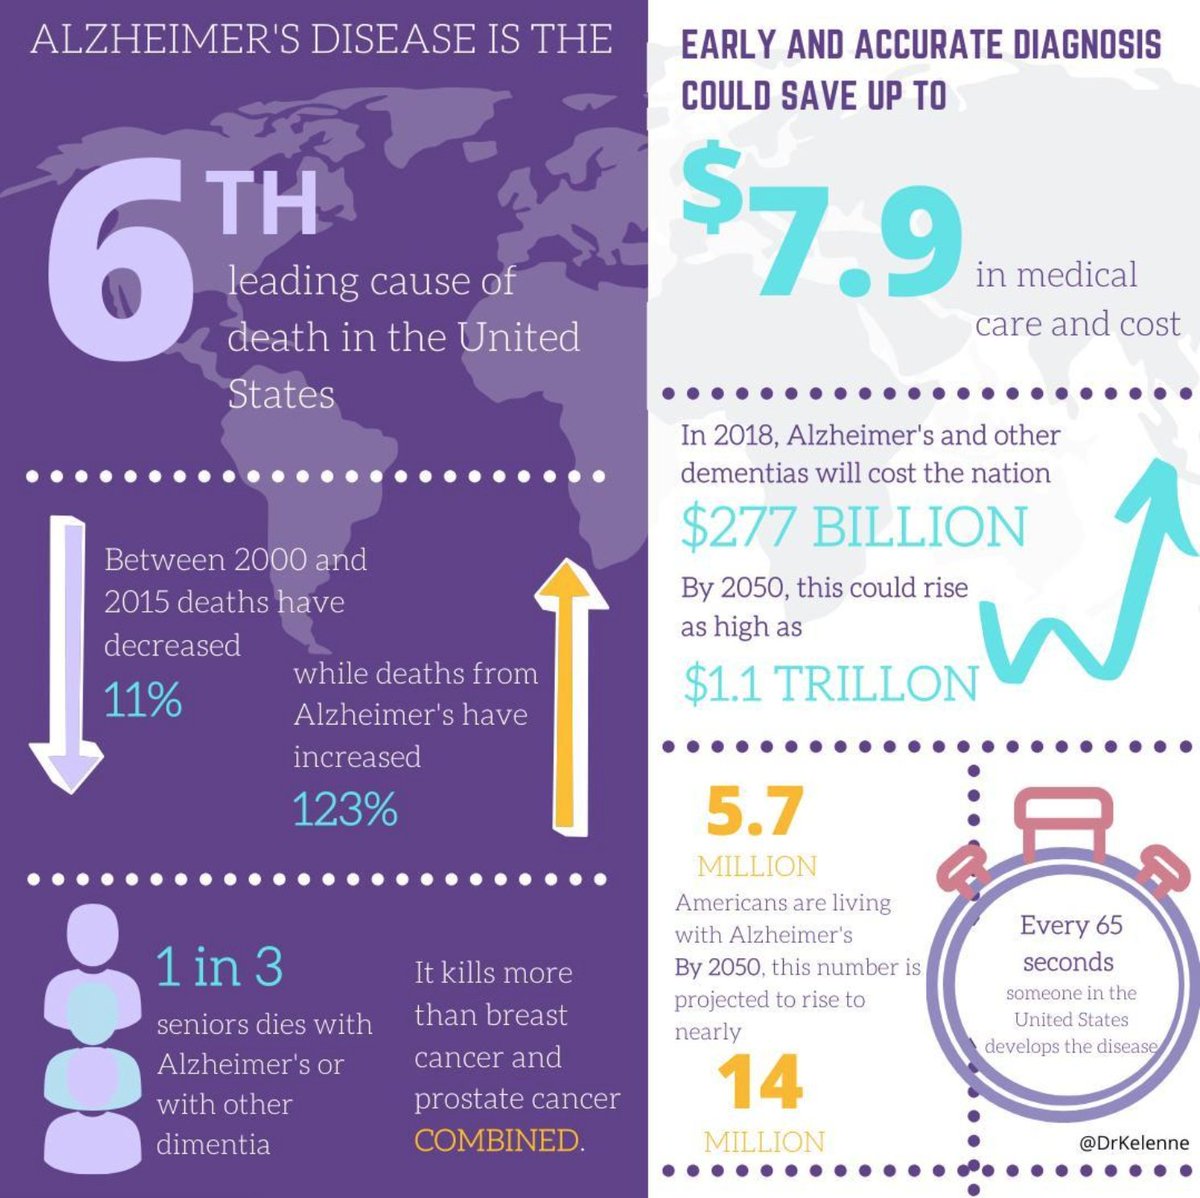 Are you wondering how serious Alzheimer's disease is? Here are some of the facts about this illness. #healthcaretips #familymedicine #caribbean #blackdoctor #telemedicine #telehealth #yourcaribbeandoctor #alzheimersawareness 🇹🇹🇻🇨🇵🇷🇦🇬🇧🇸🇧🇧🇧🇷🇨🇦🇫🇰🇬🇩🇬🇾🇯🇲🇭🇹🇱🇨🇰🇳